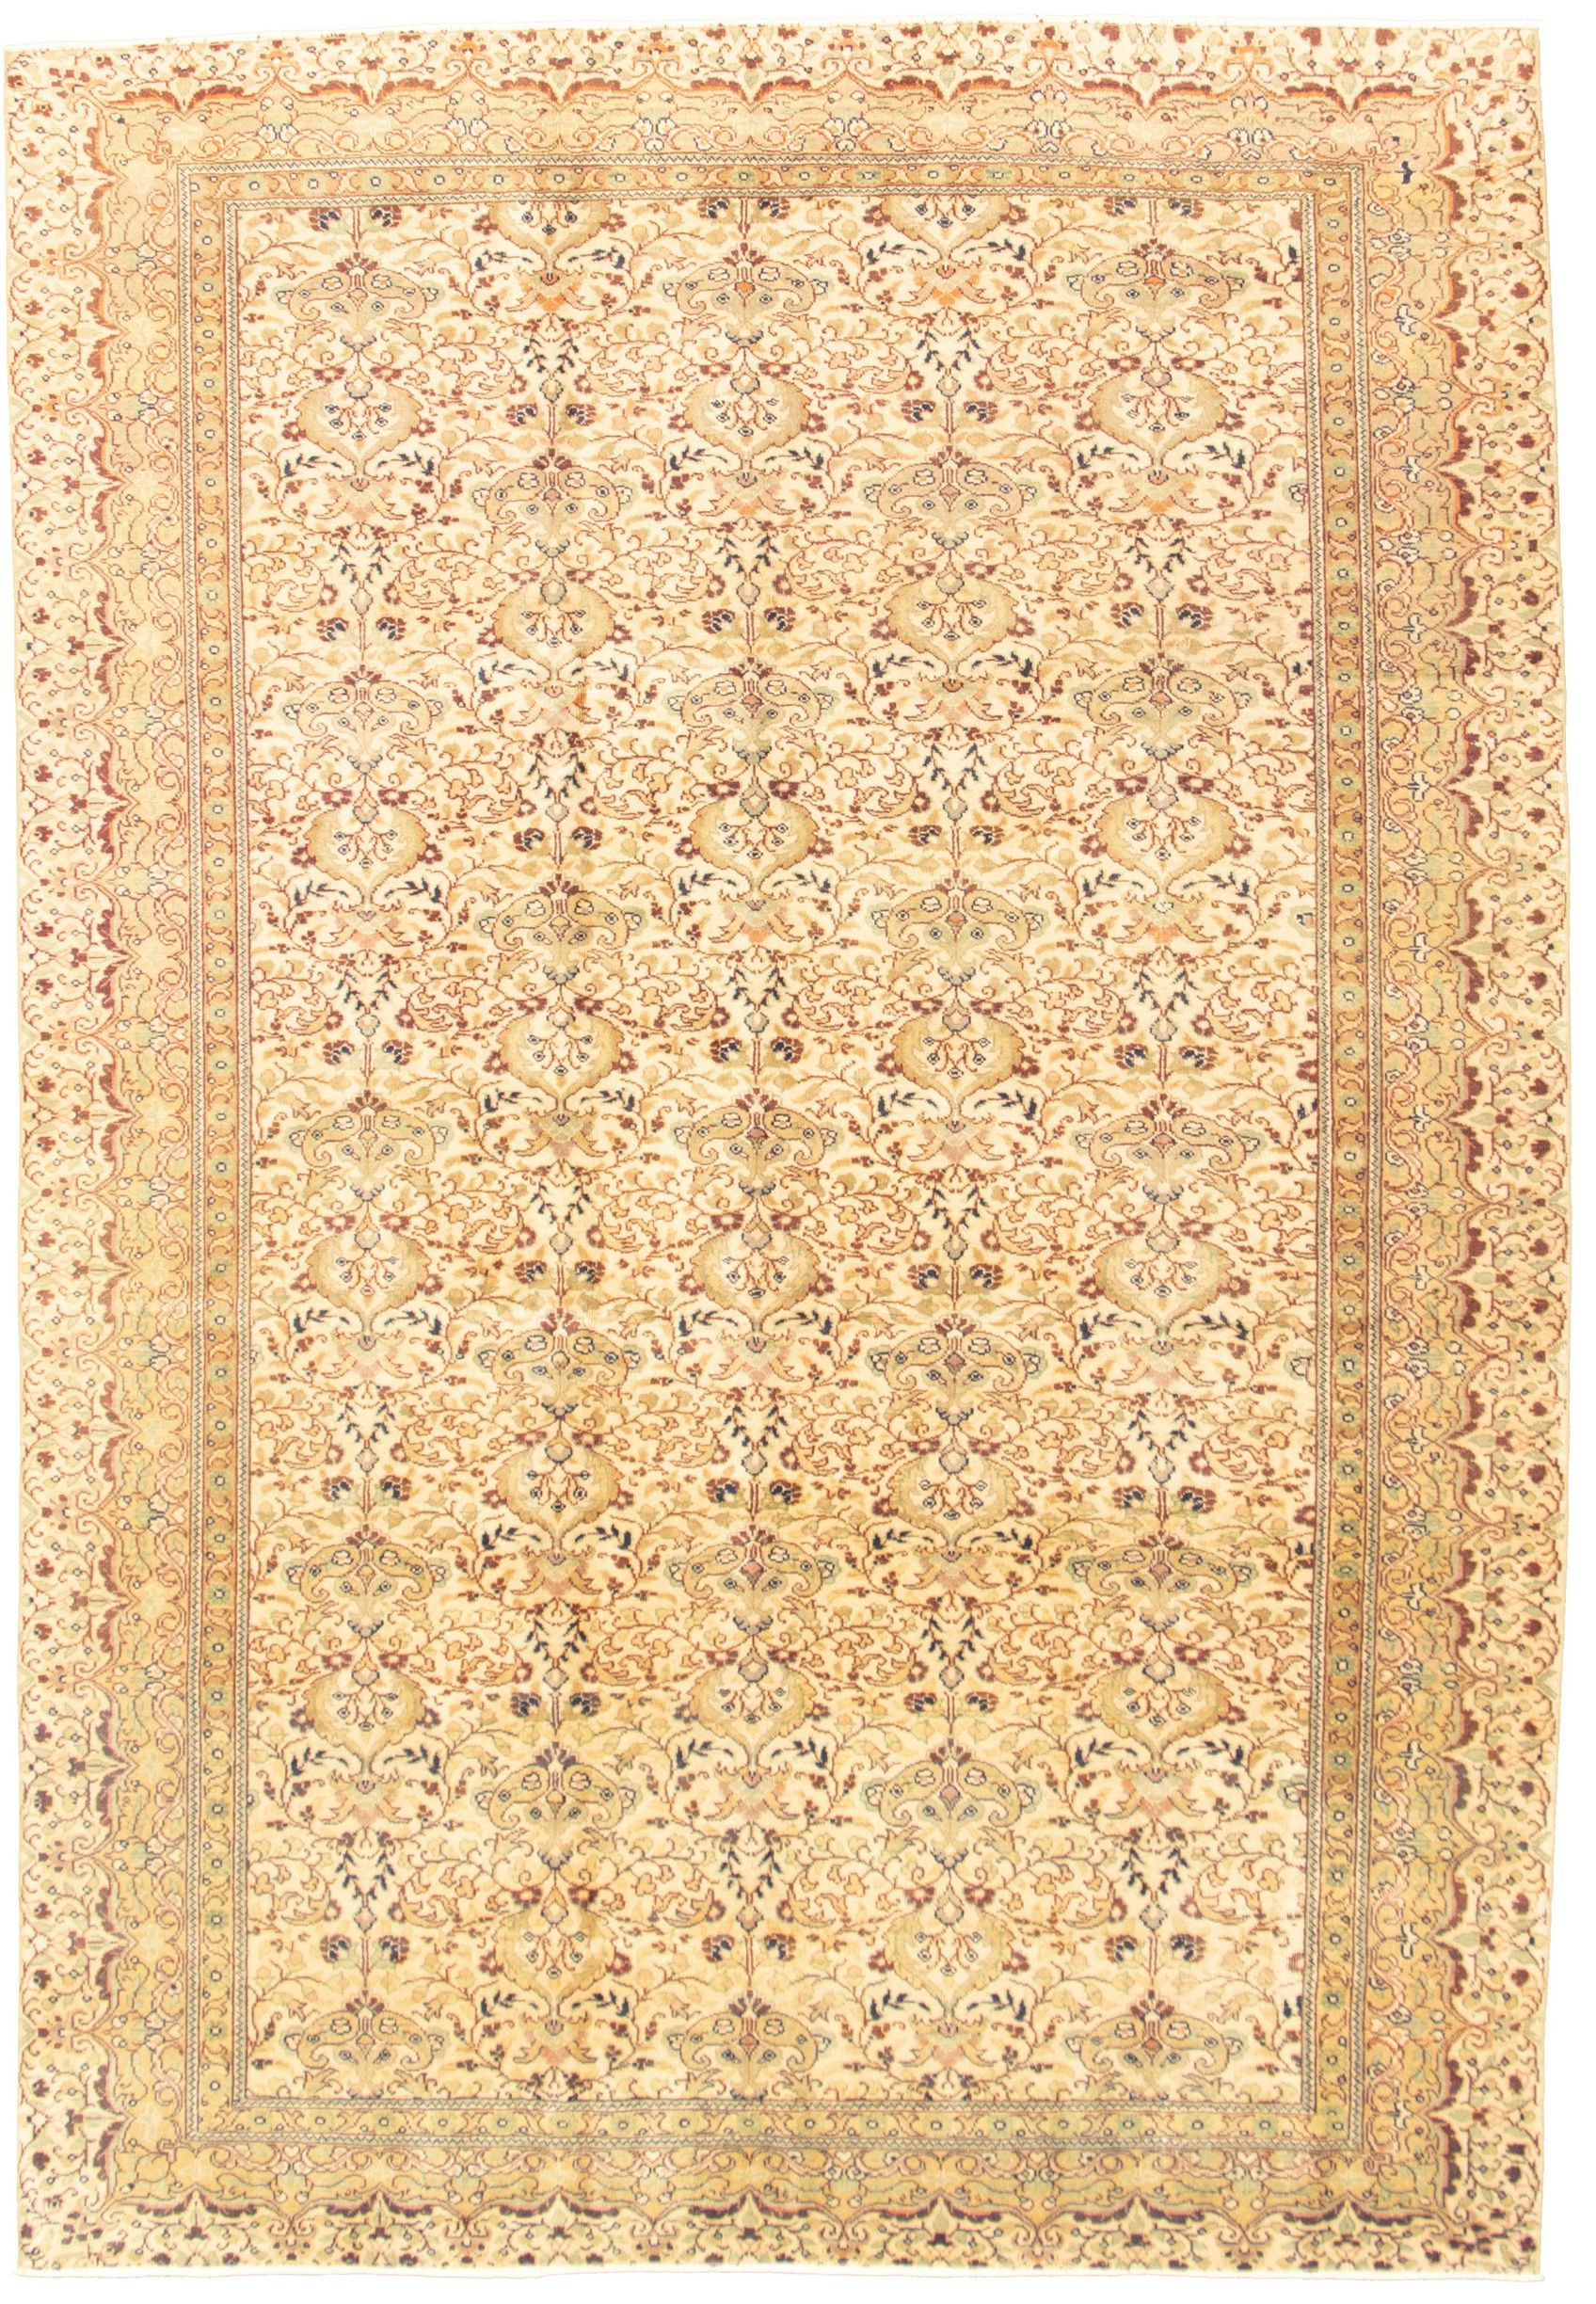 Hand-knotted Keisari Vintage Cream Wool Rug 6'7" x 9'7"  Size: 6'7" x 9'7"  